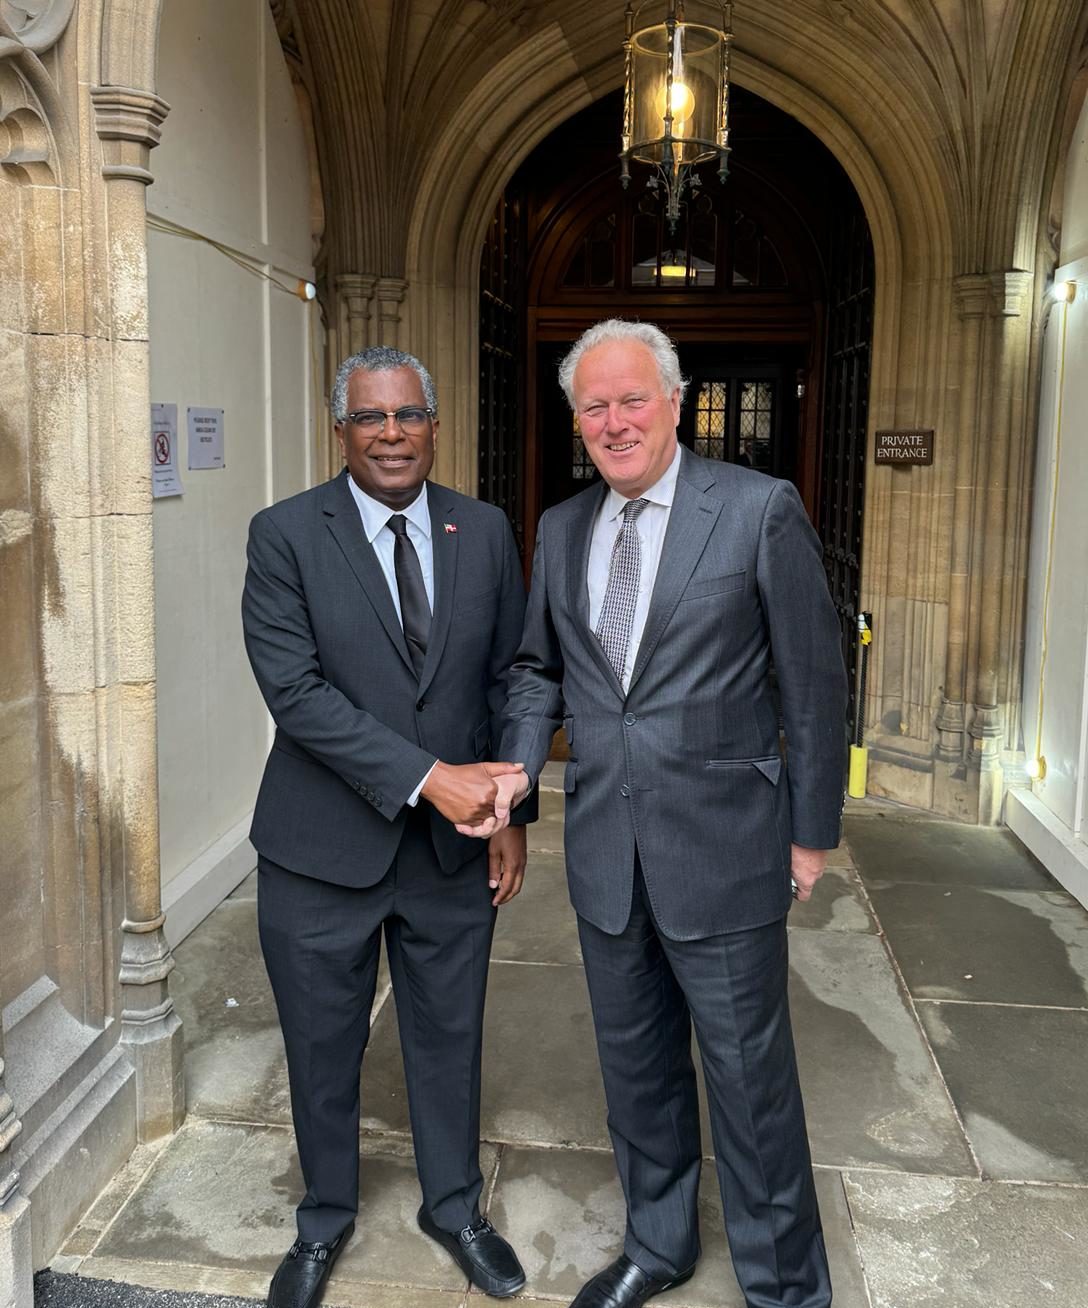 Minister of Foreign Affairs from The Bahamas visits Lord Marland at the House of Lords